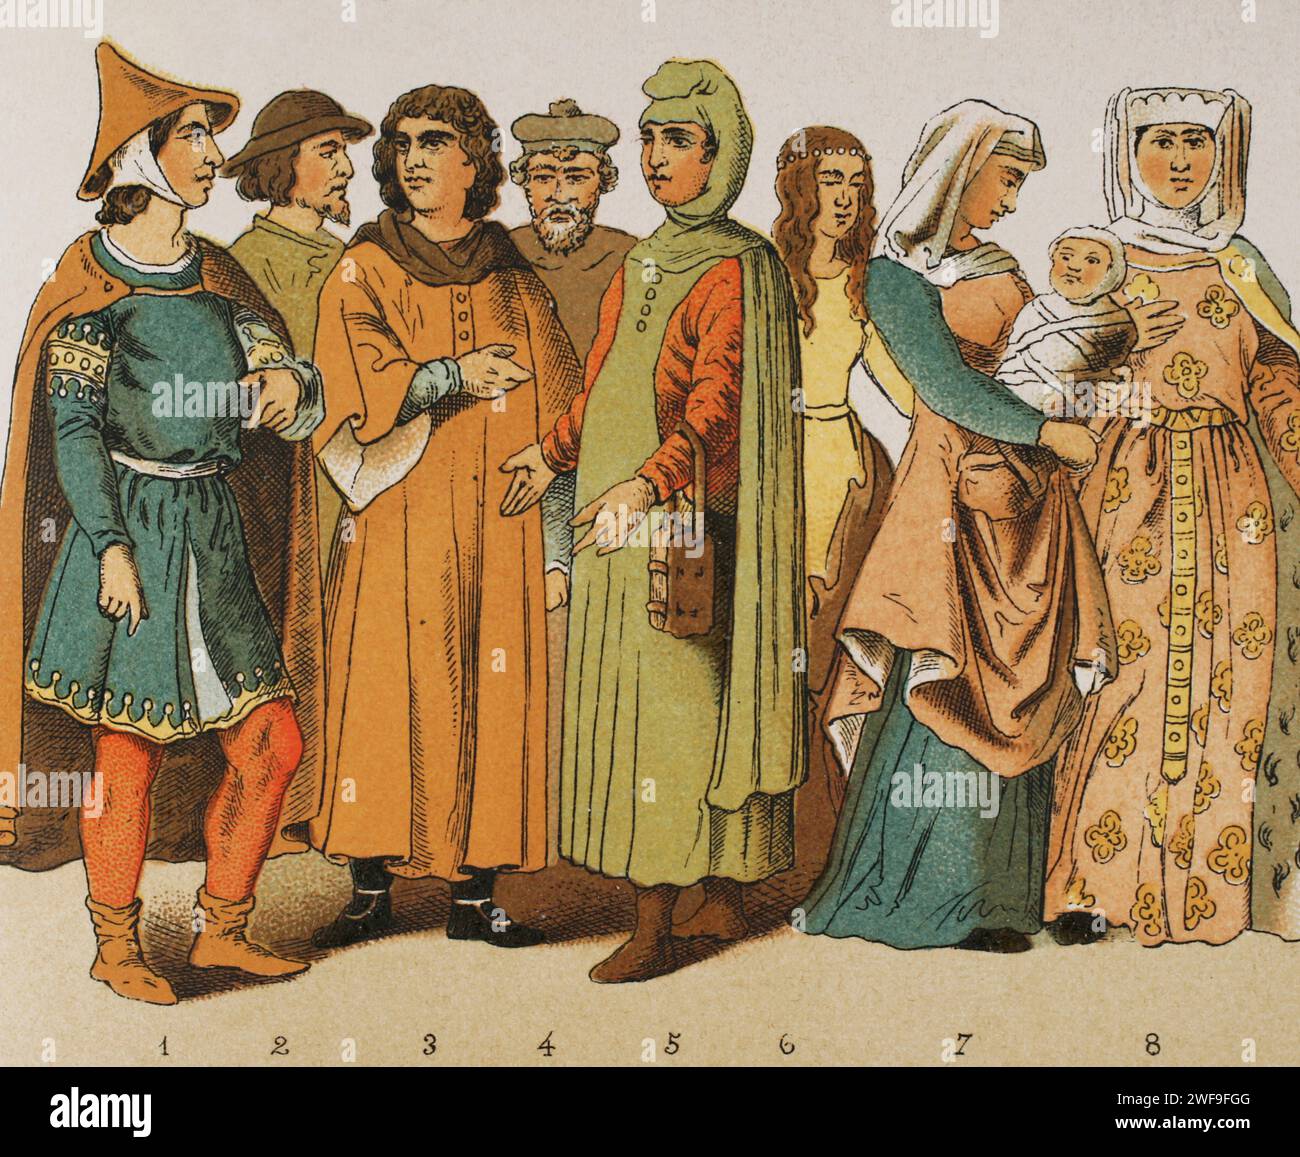 History of France. 1200. From left to right, 1-2-3-4-5-6-7: ordinary people dresses, 8: princess. Chromolithography. Detail. 'Historia Universal', by César Cantú. Volume VI, 1885. Stock Photo